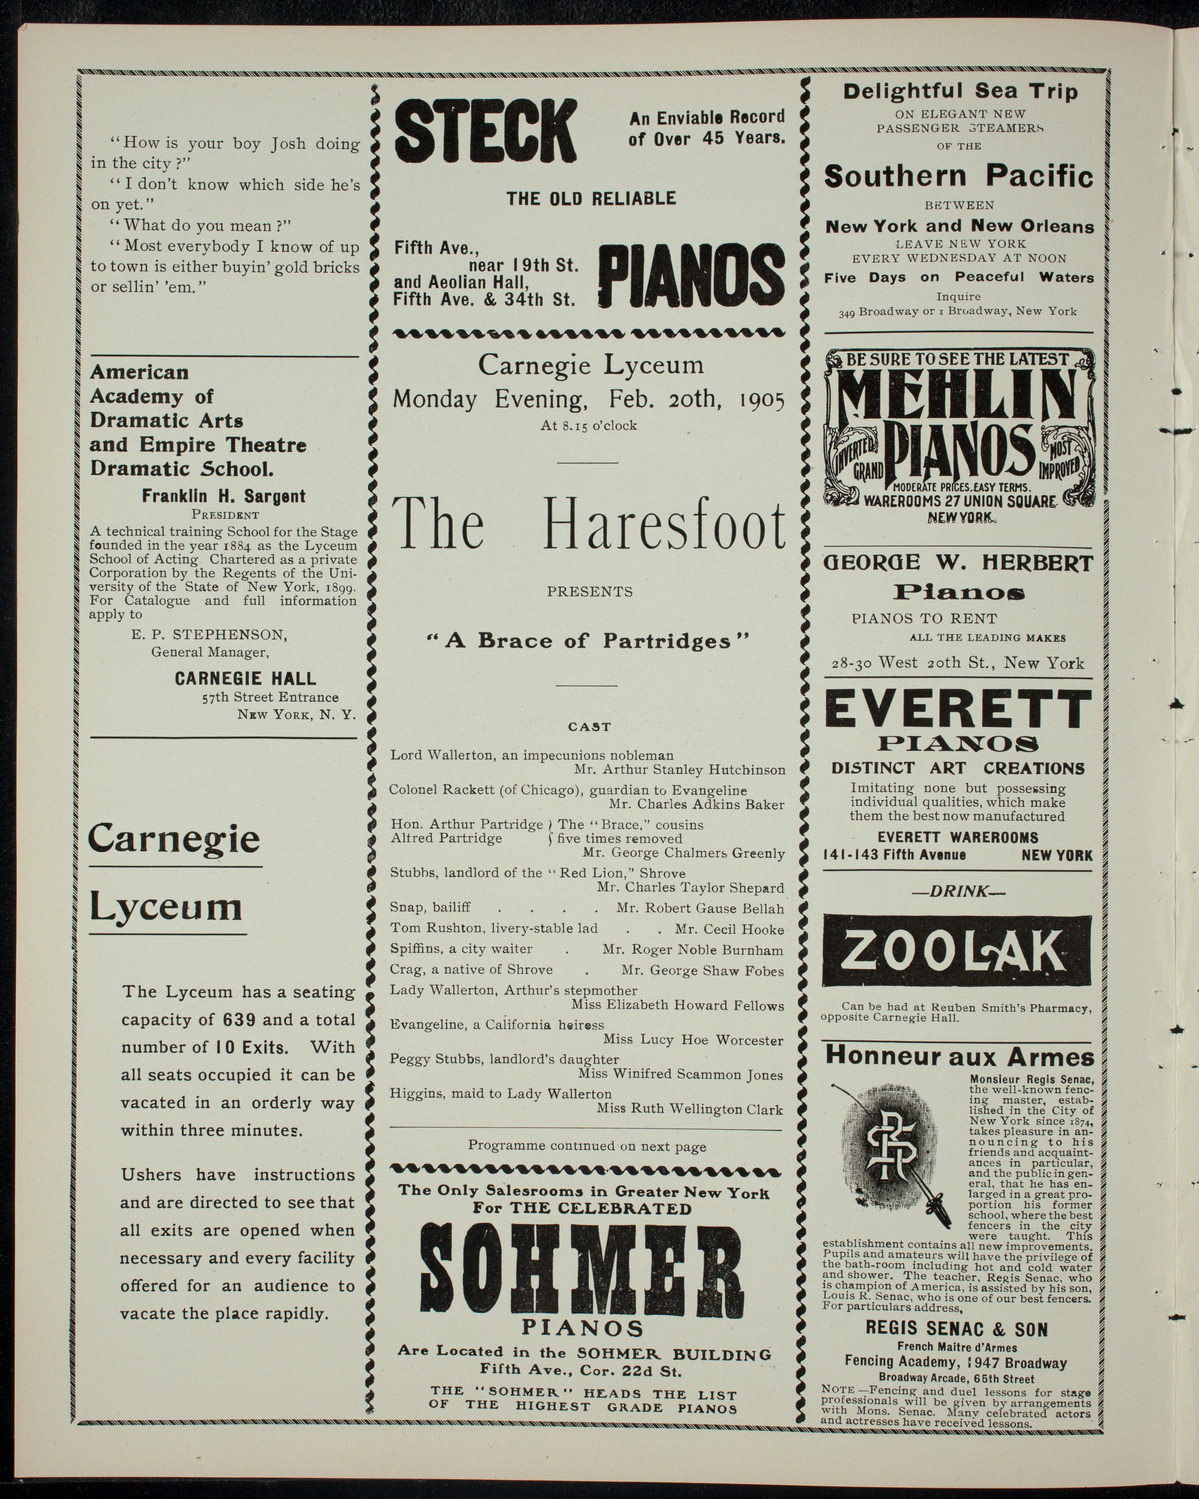 The Haresfoot Club Theatre Group, February 20, 1905, program page 2